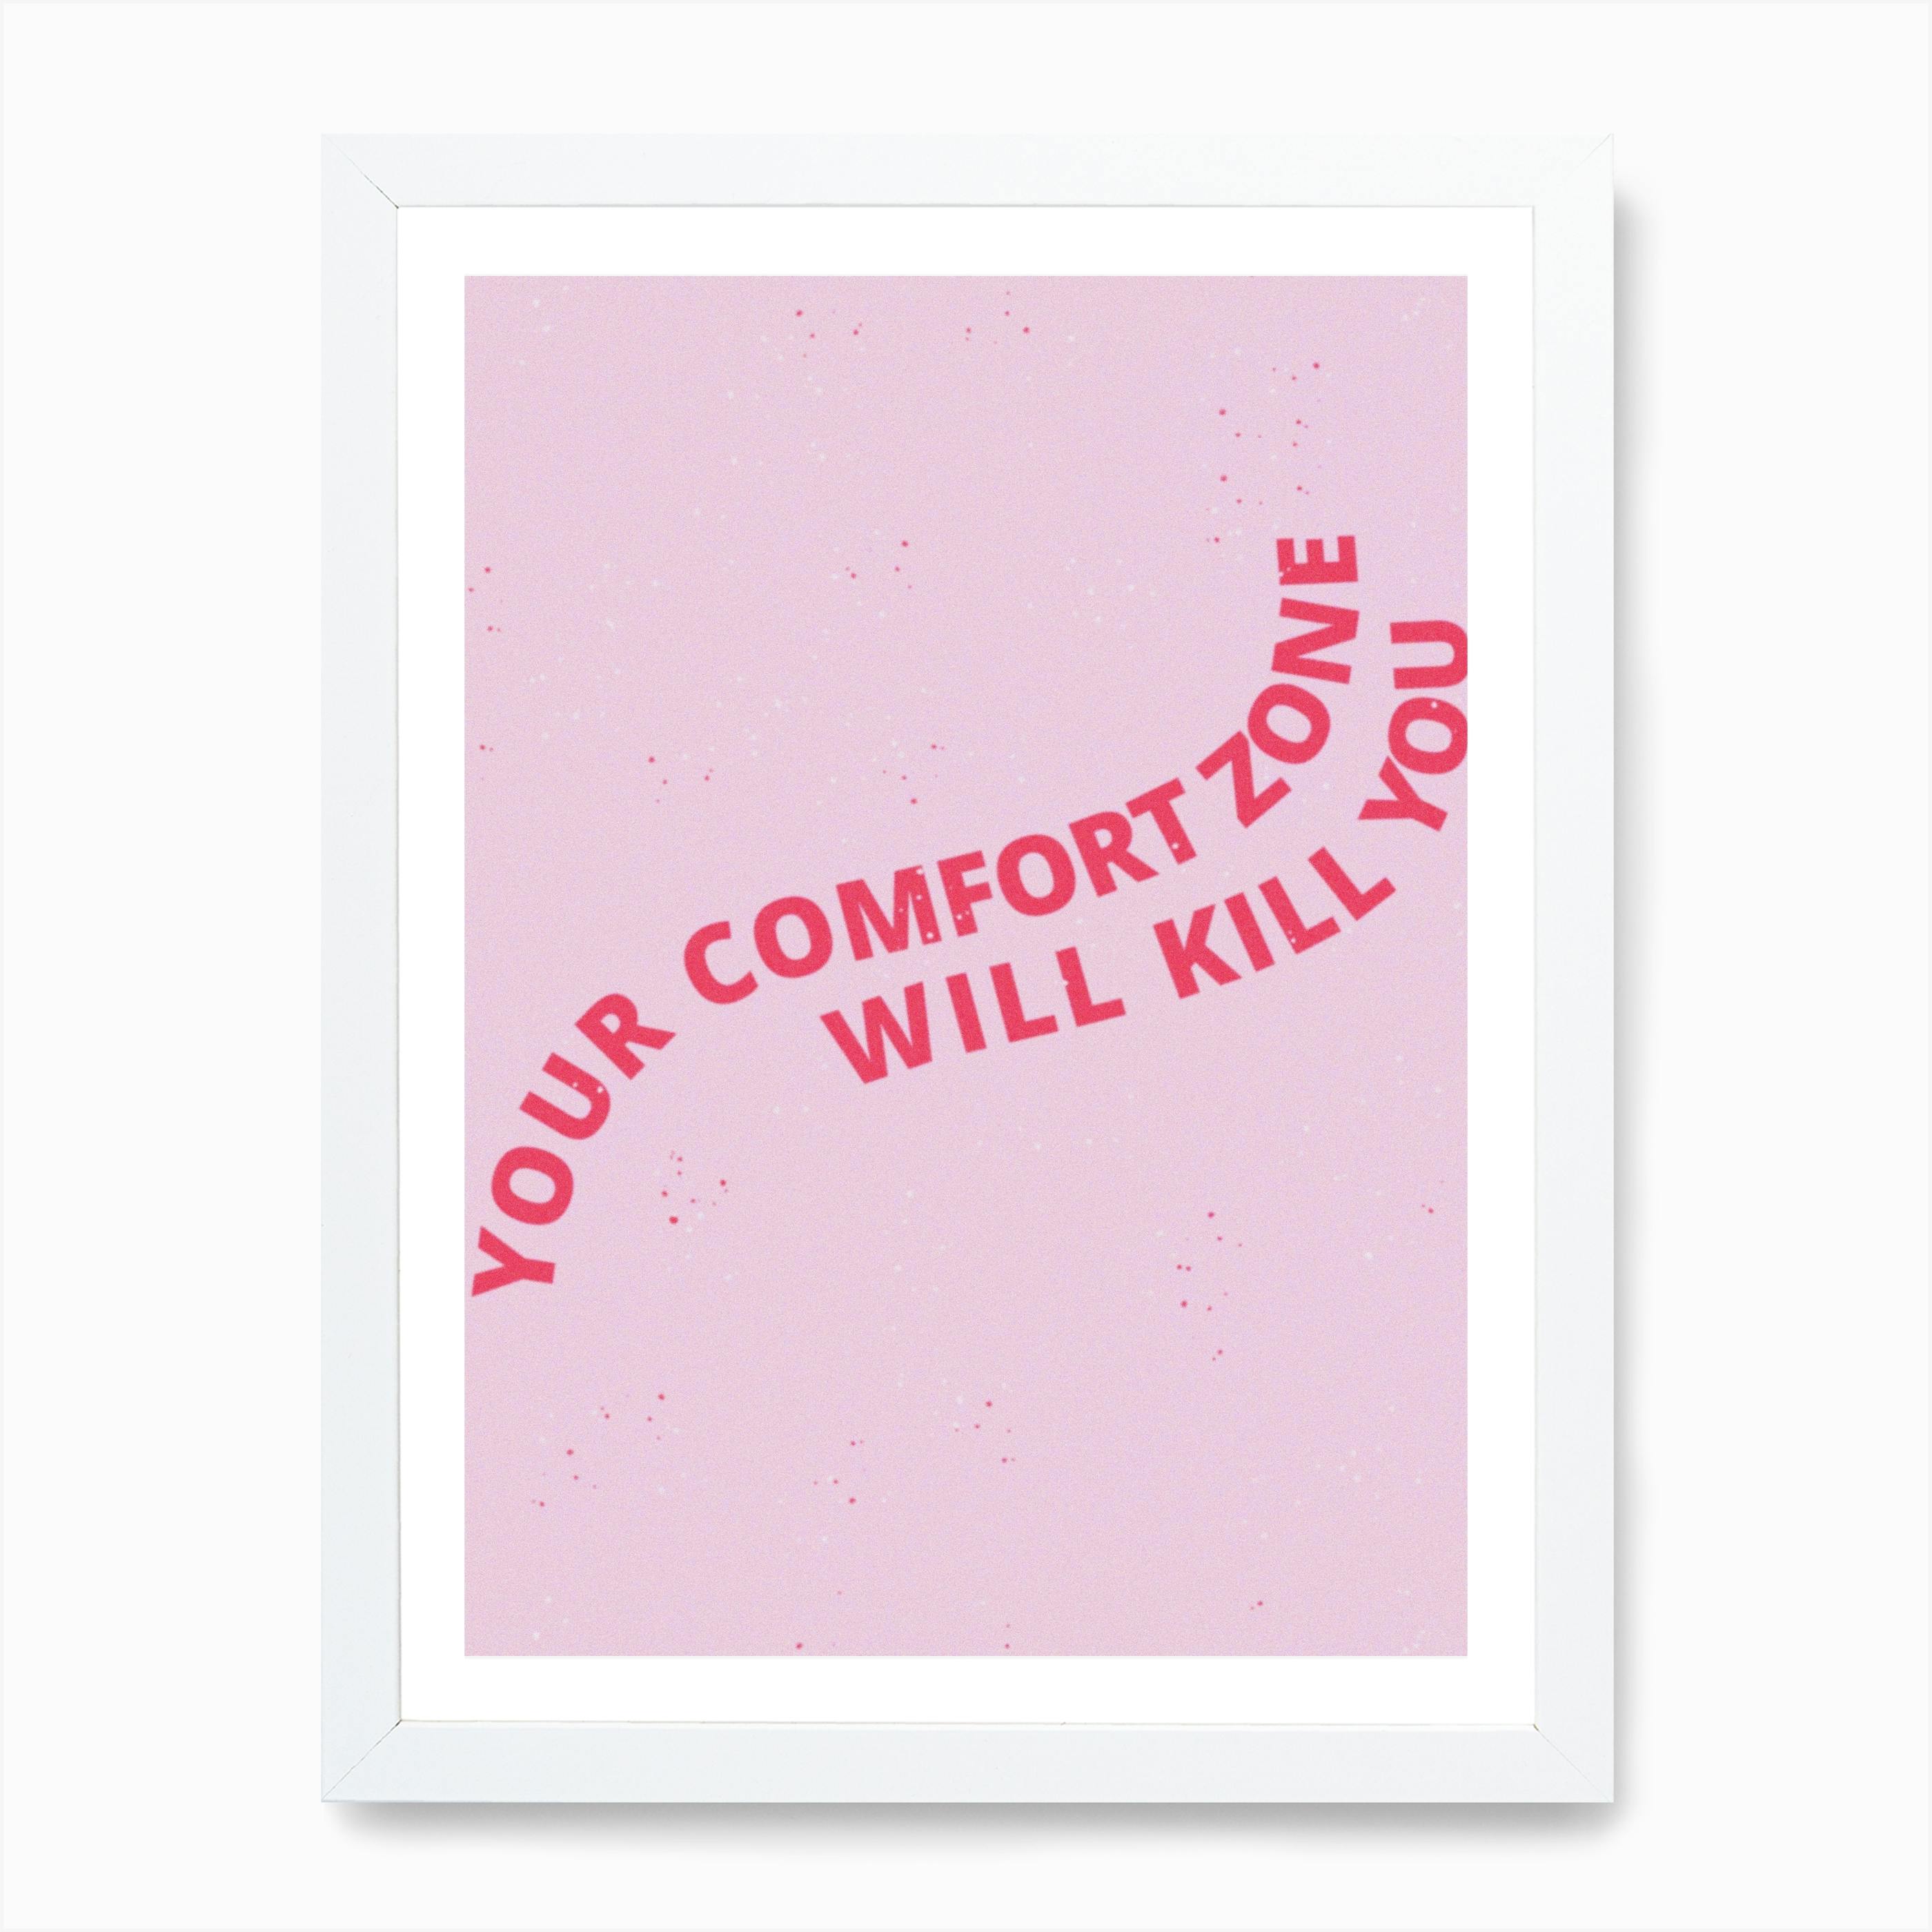 your comfort zone will kill you